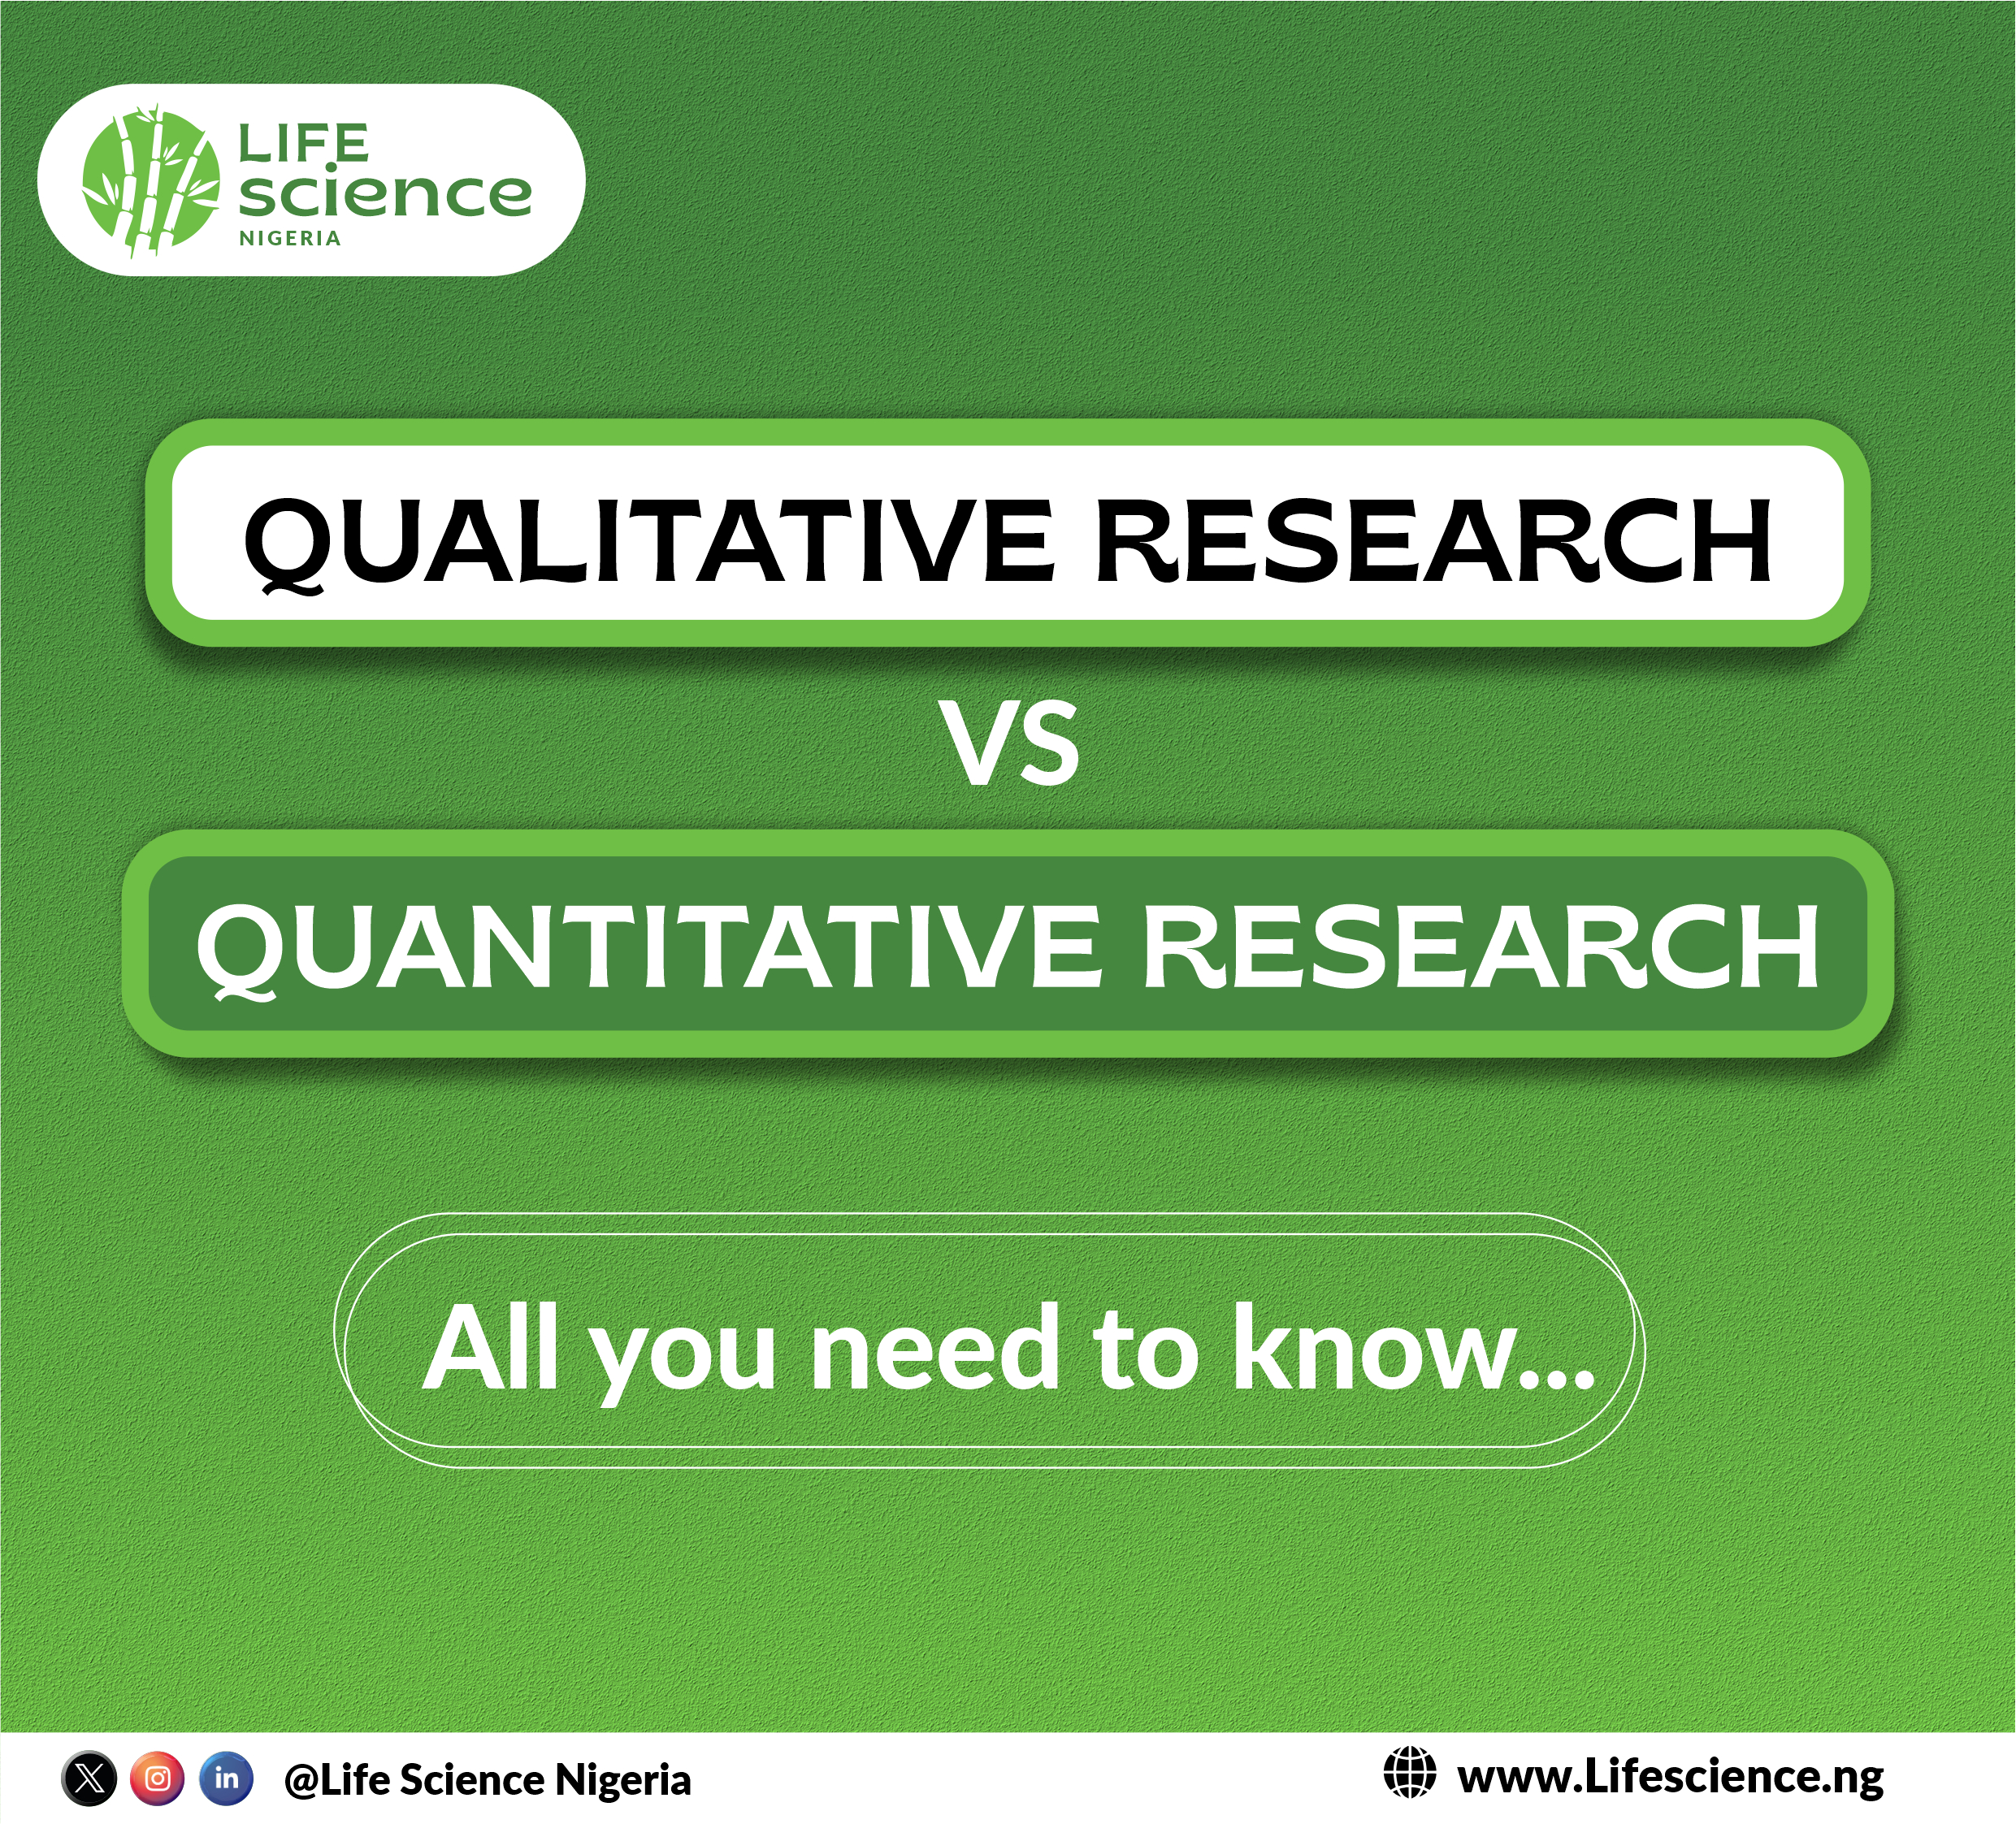 WHAT IS THE DIFFERENCE BETWEEN QUALITATIVE AND QUATITATIVE RESEARCH?